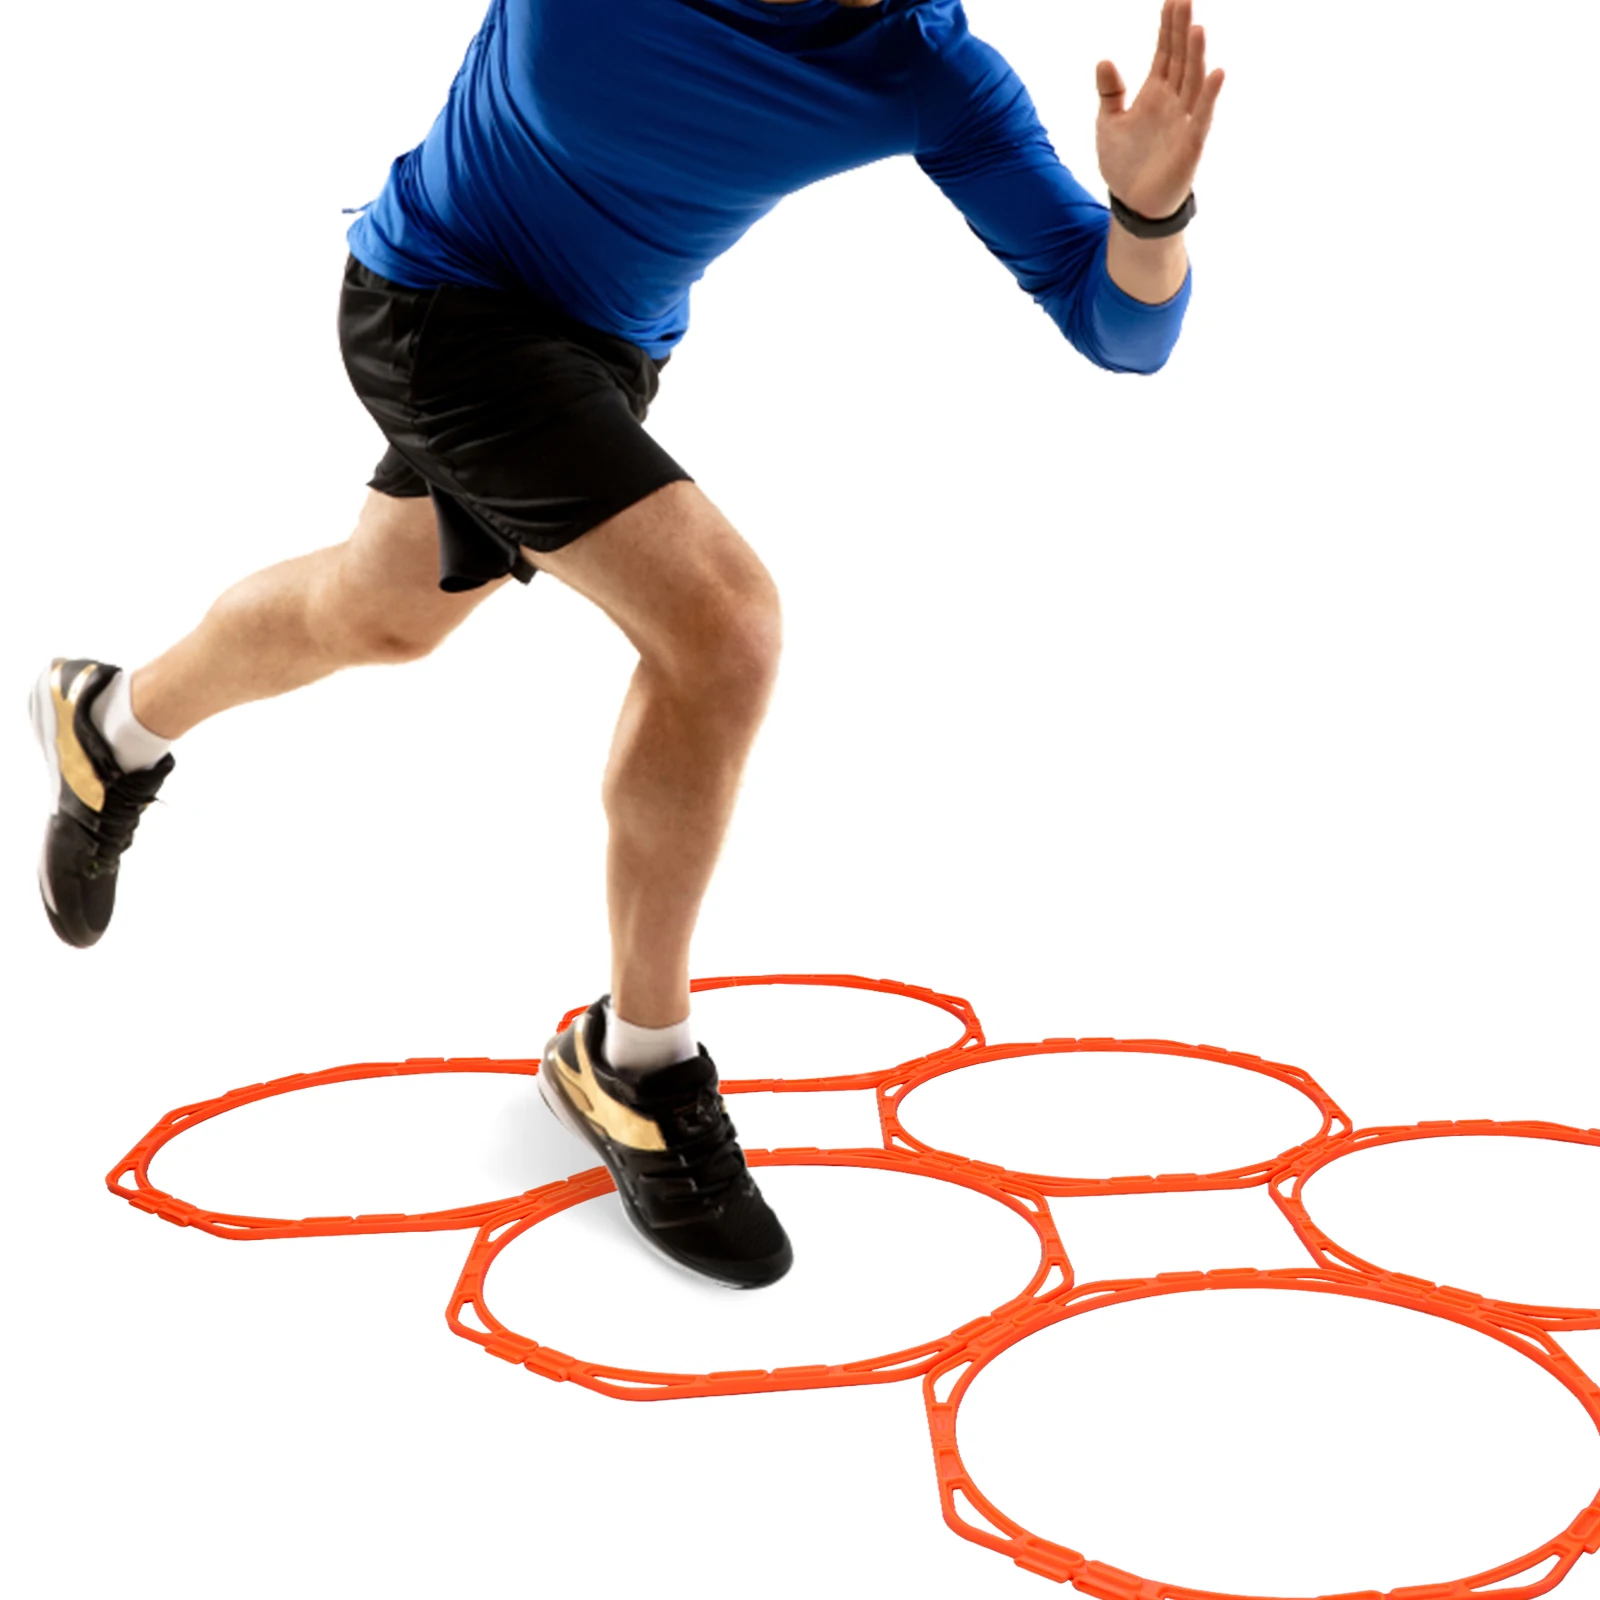 Hikeen Octagonal Agility Rings Speed Rings Agility Footwork Training and Speed Hurdles Ladder Fitness Equipment Sport Workout